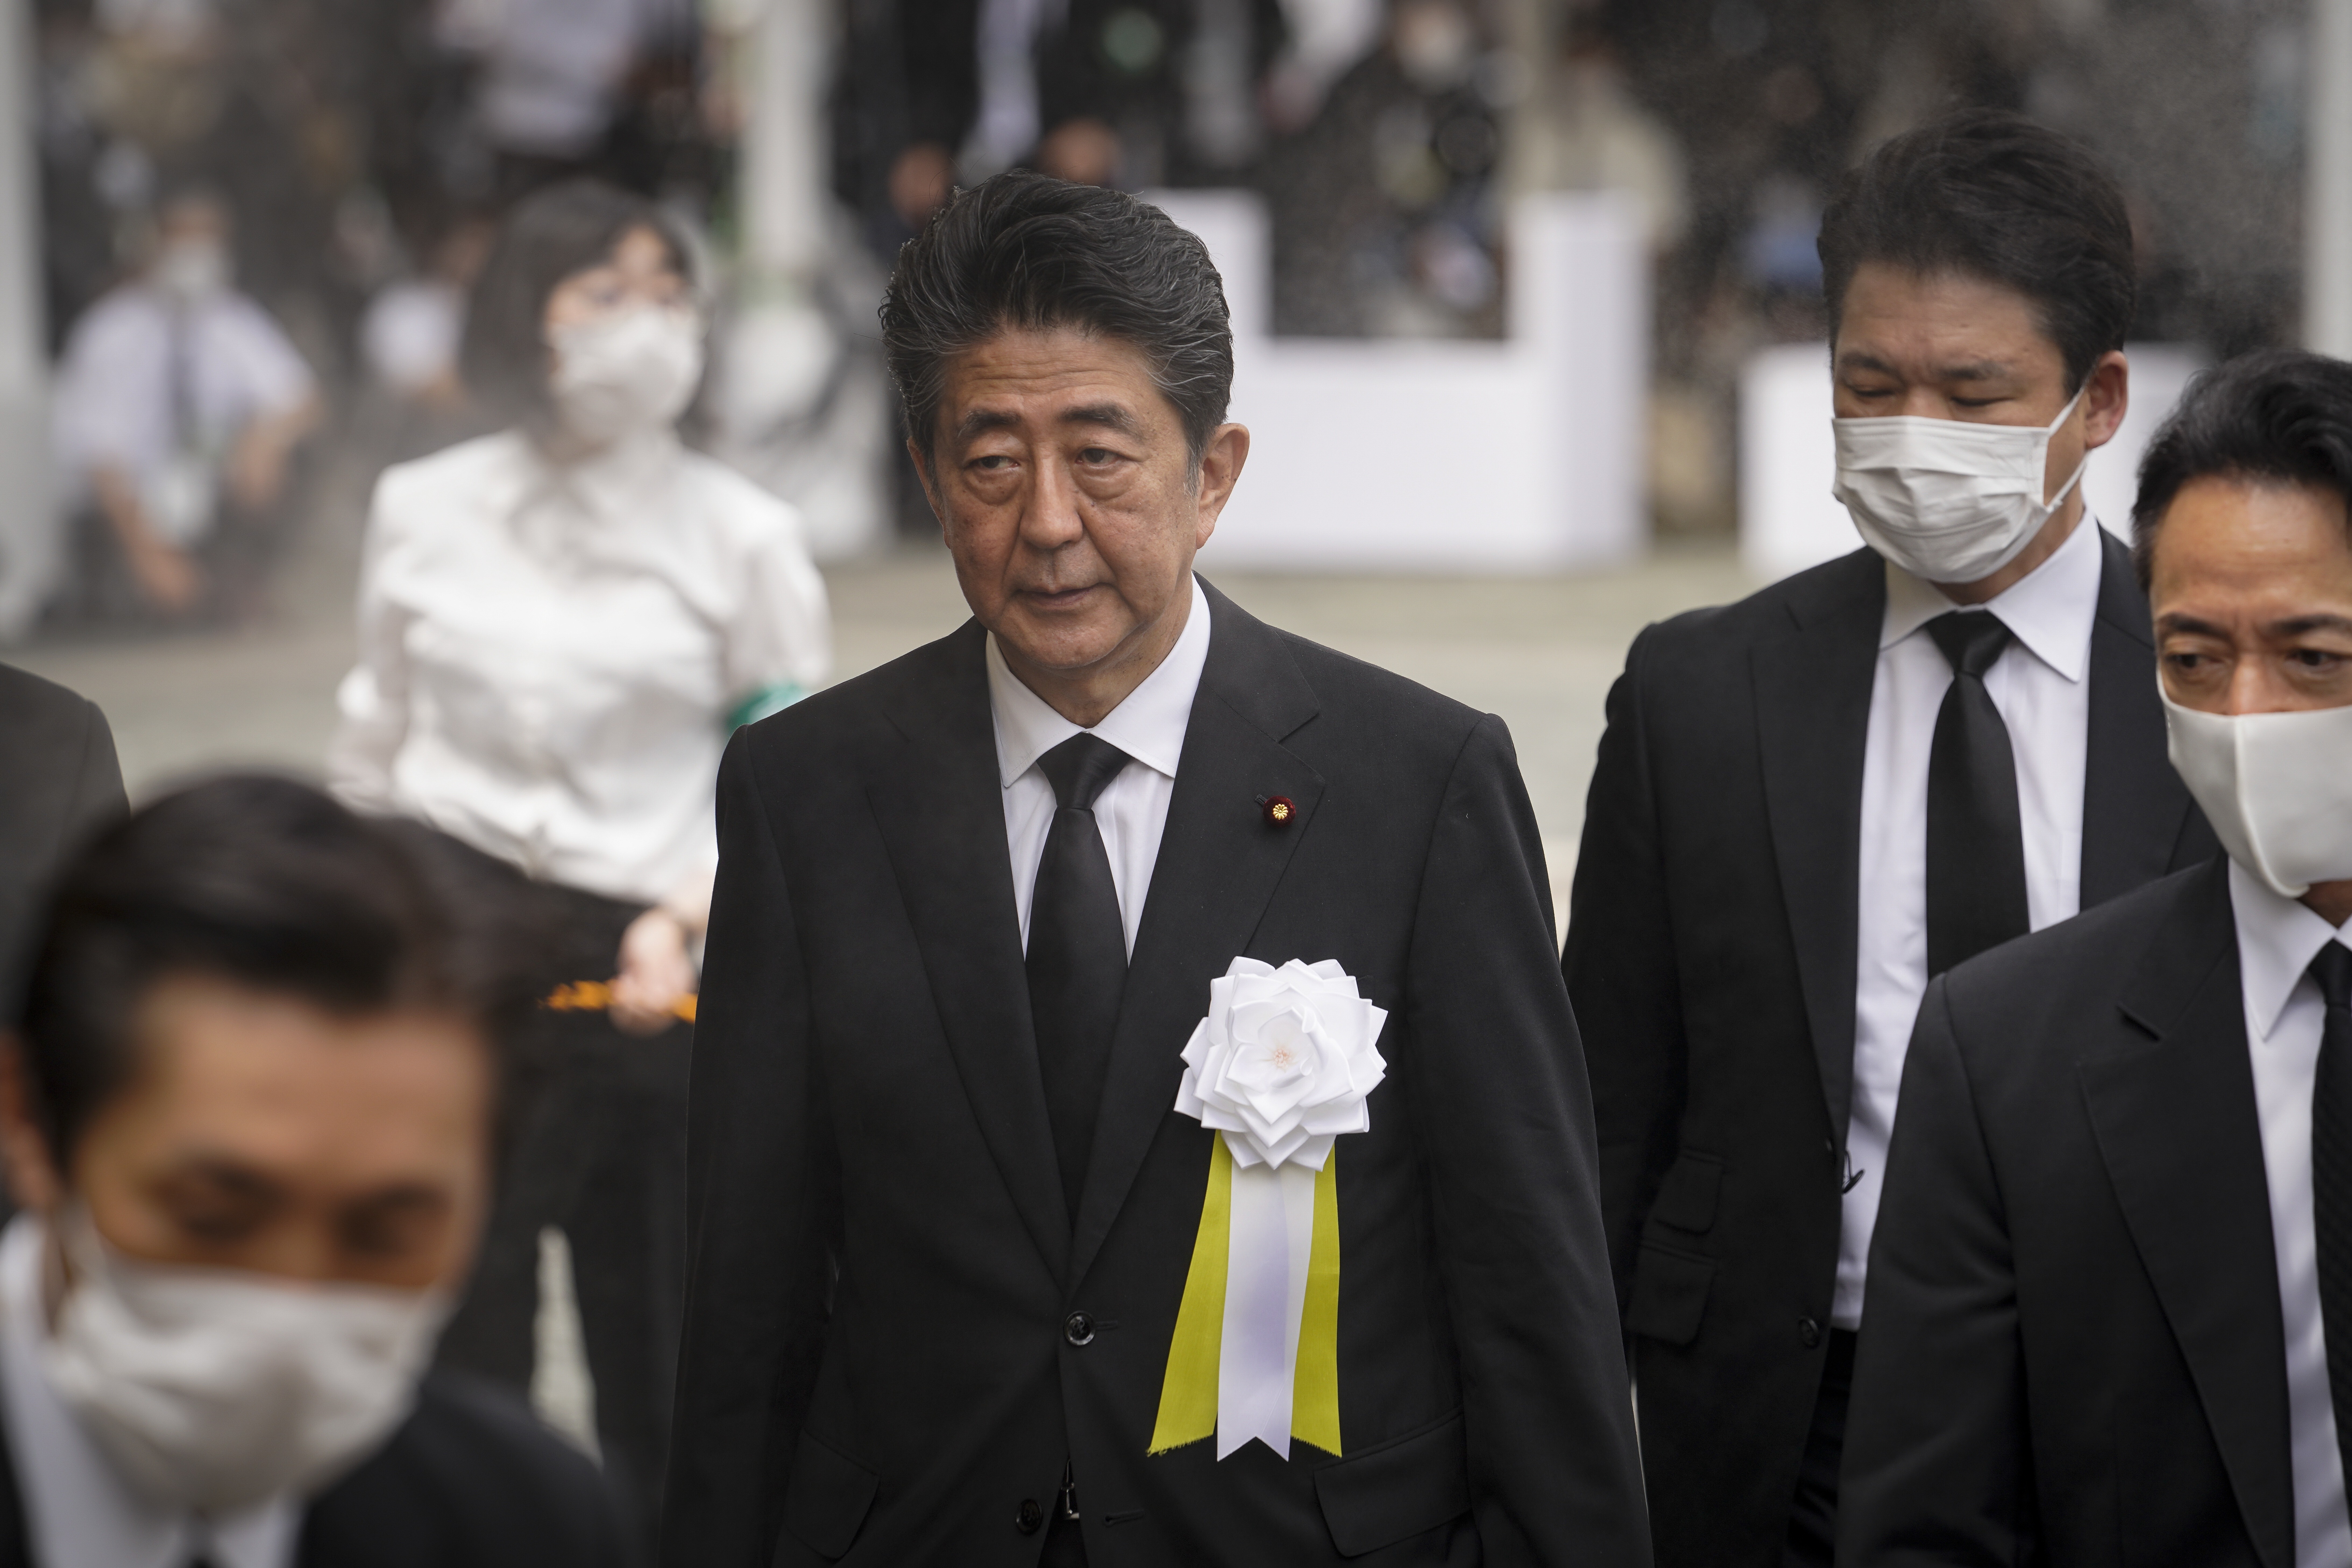 Japanese Prime Minister Shinzo Abe after attending an official event in Nagasaki on August 9. Photo: EPA